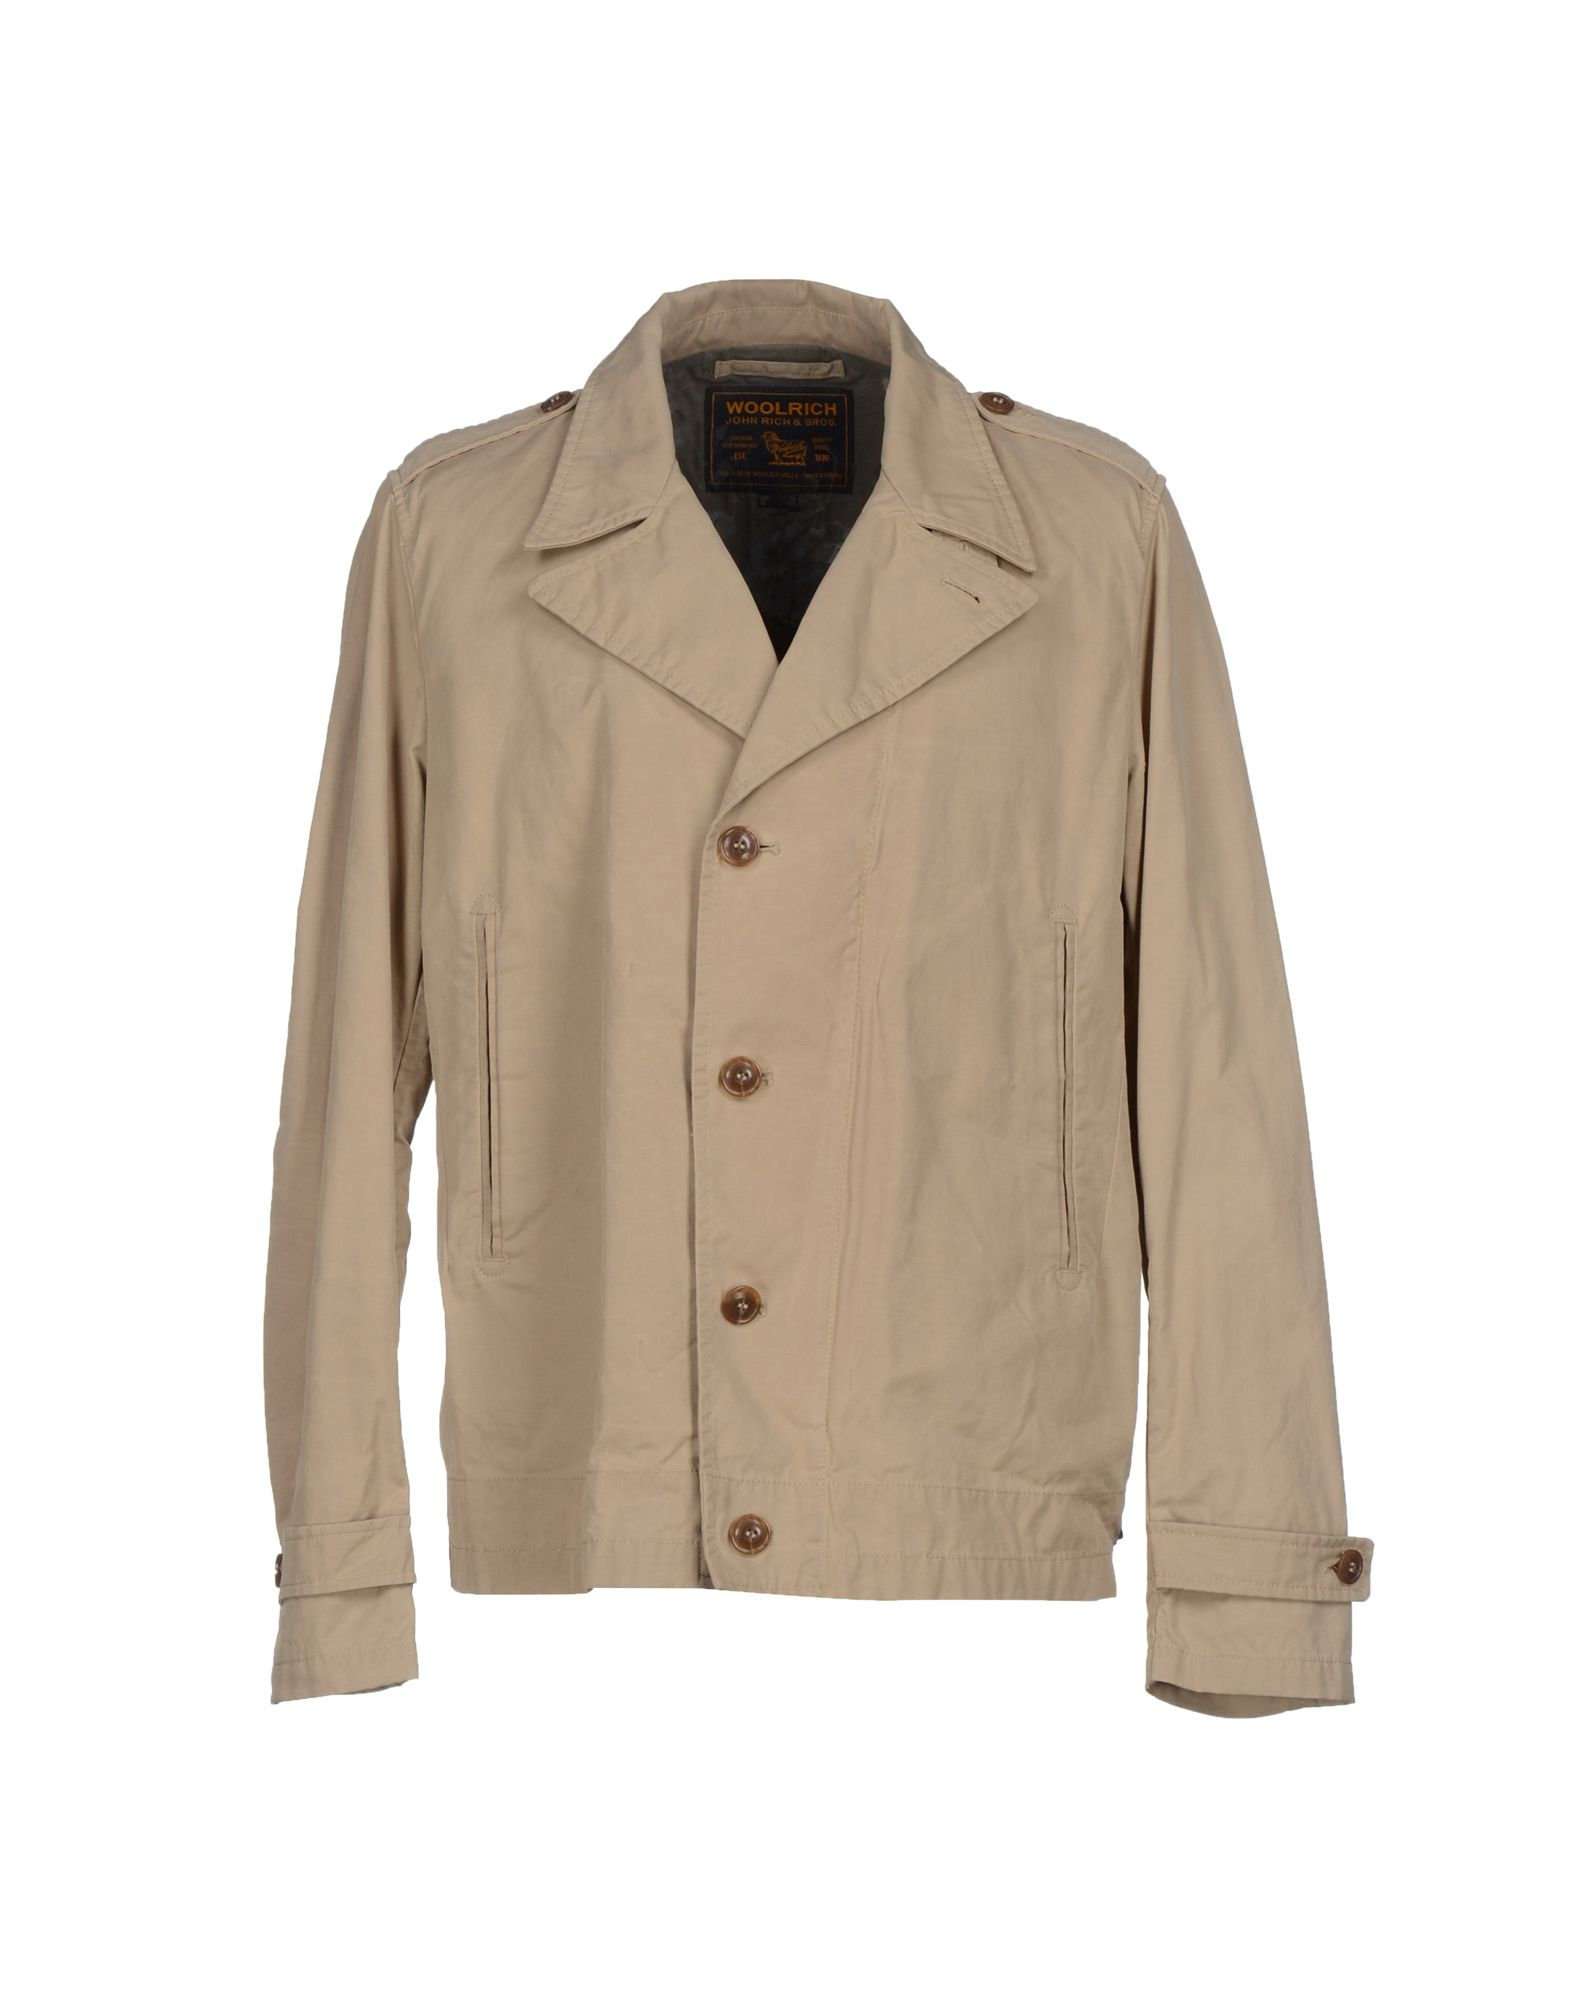 Lyst - Woolrich Jacket in Natural for Men